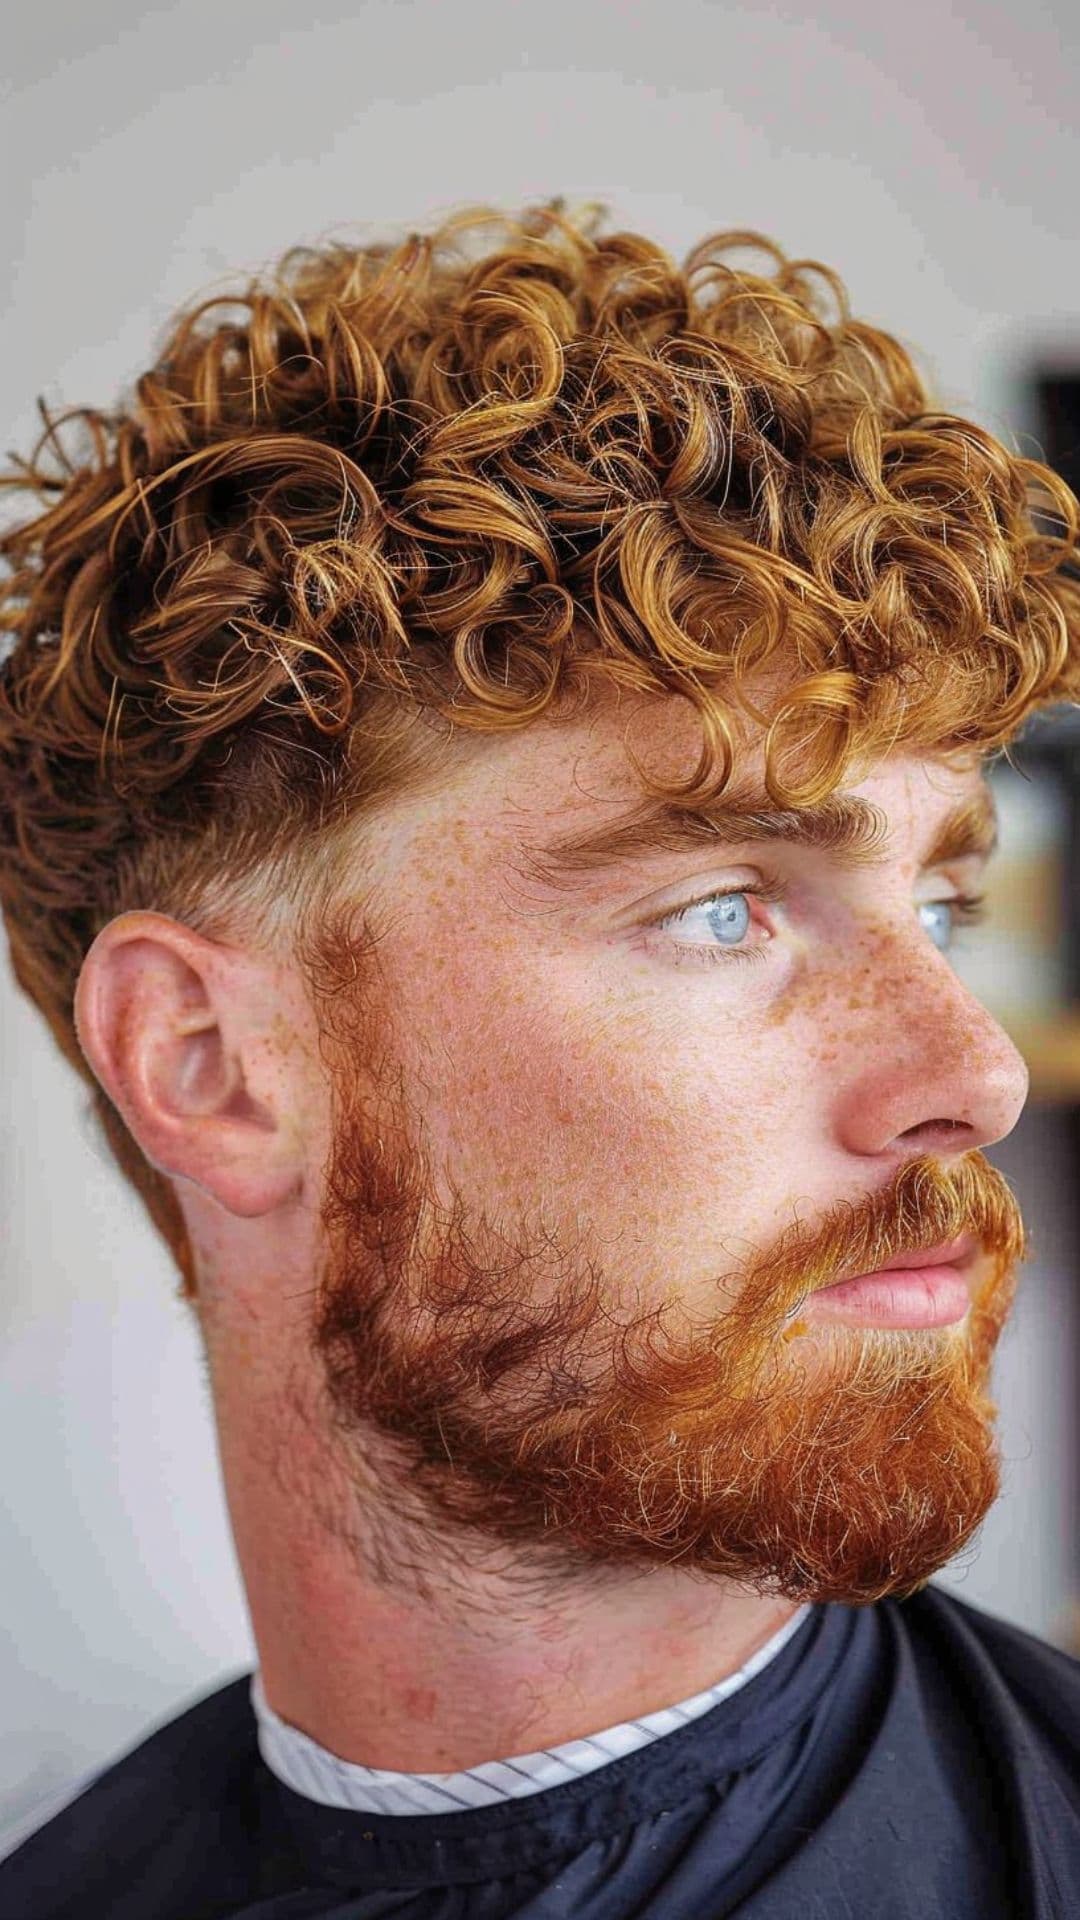 A man modelling a curly caesar cut hairstyle.